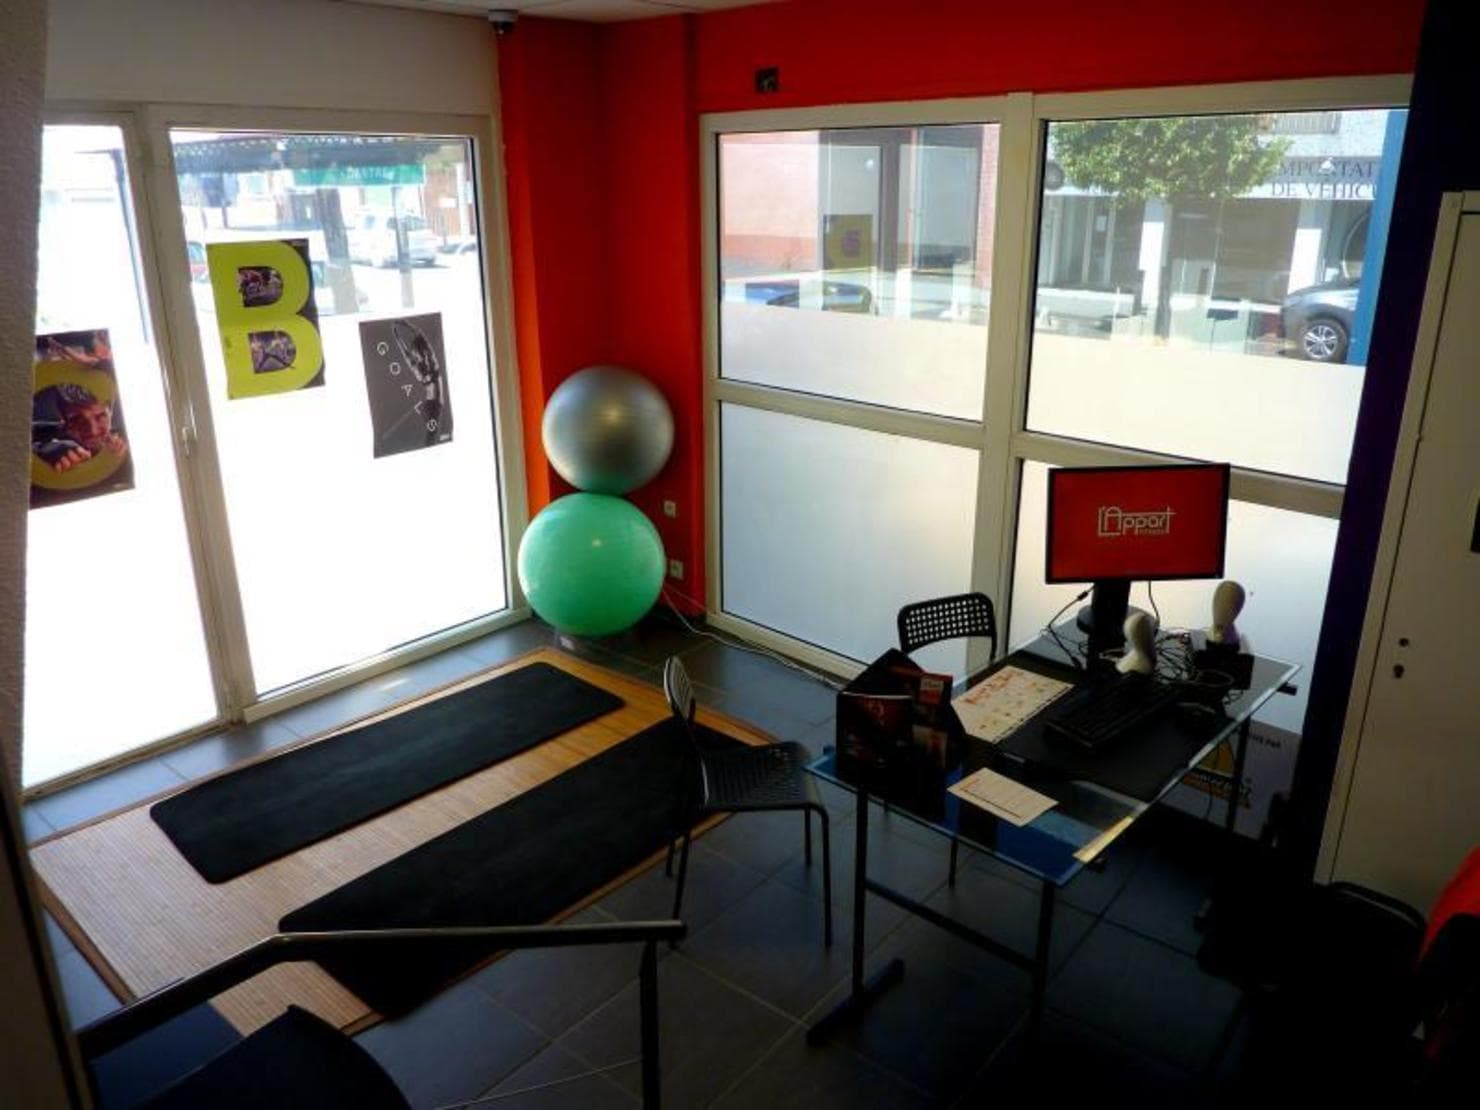 L'Appart Fitness Clermont Ferrand